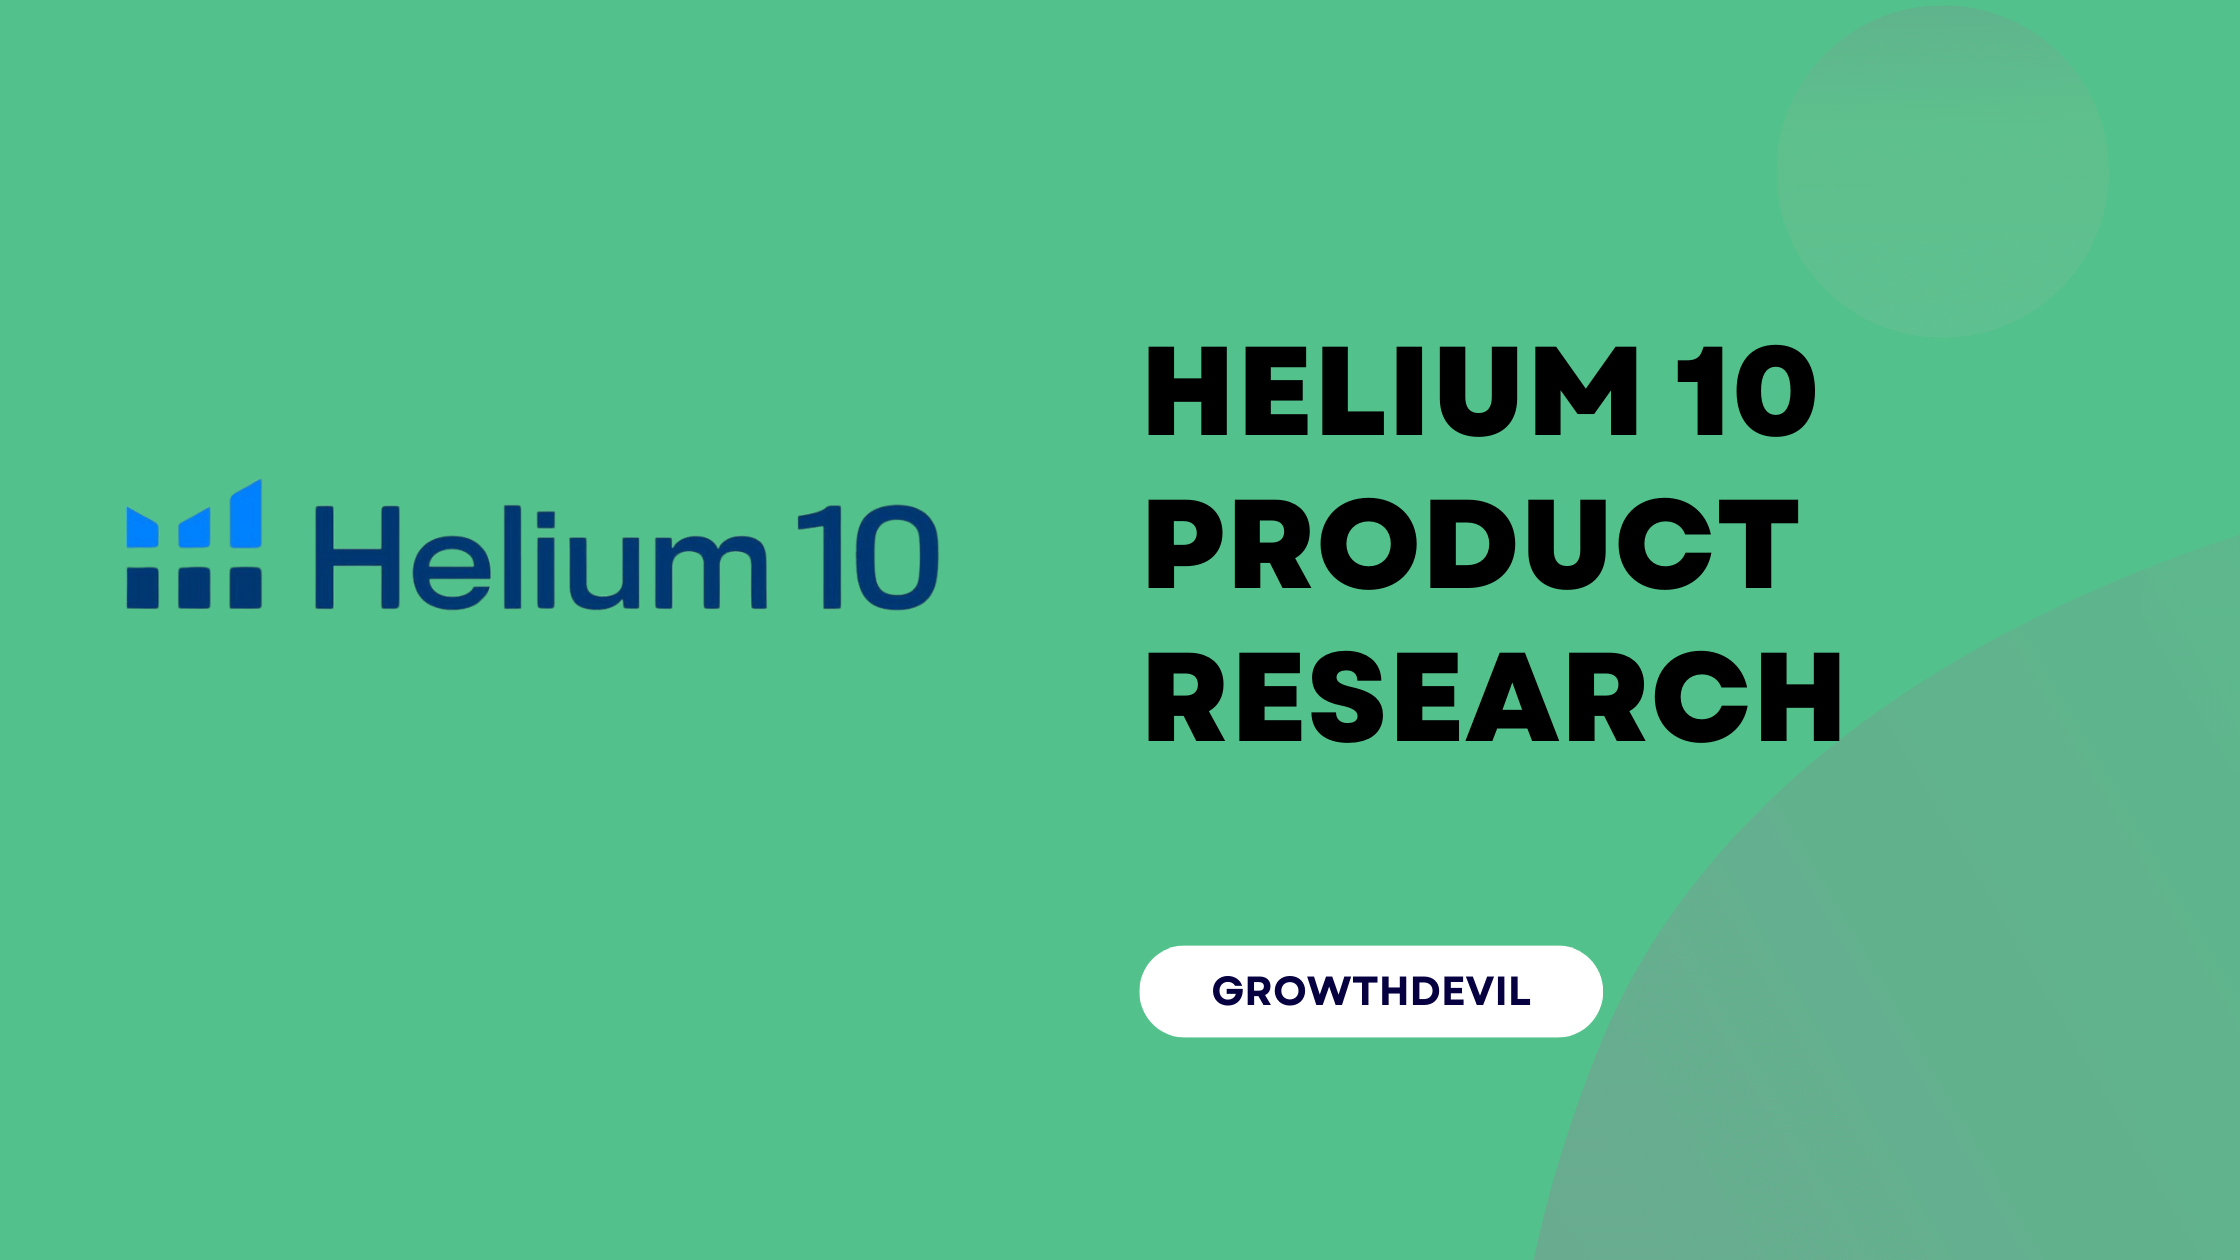 Helium 10 Product Research - GrowthDevil